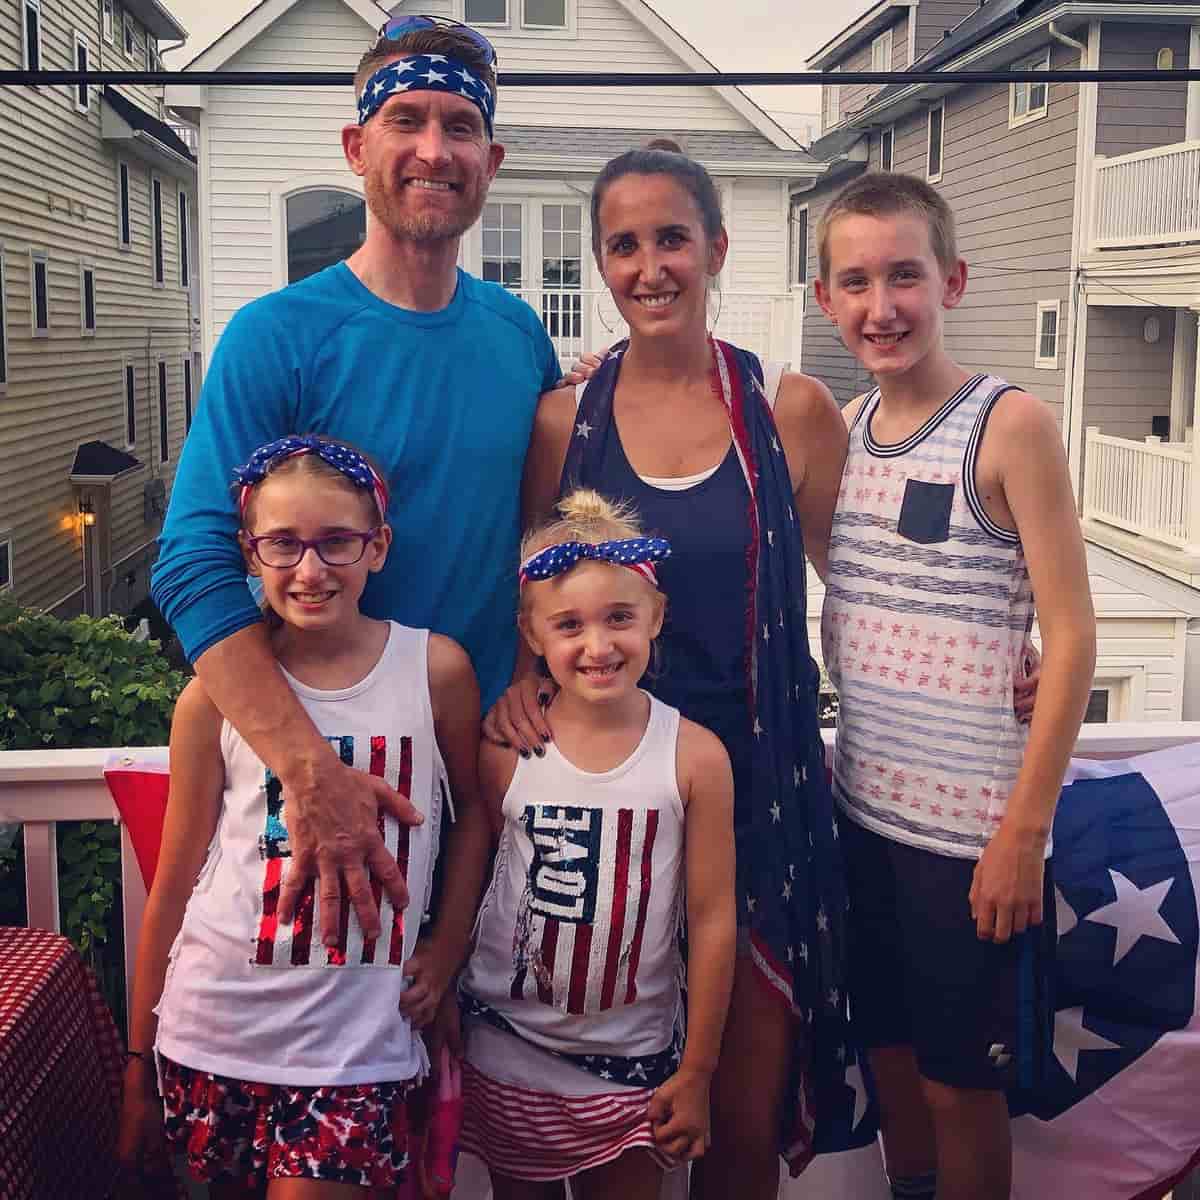 Image of Marty Smith with his wife, Lainie Smith, and their kids